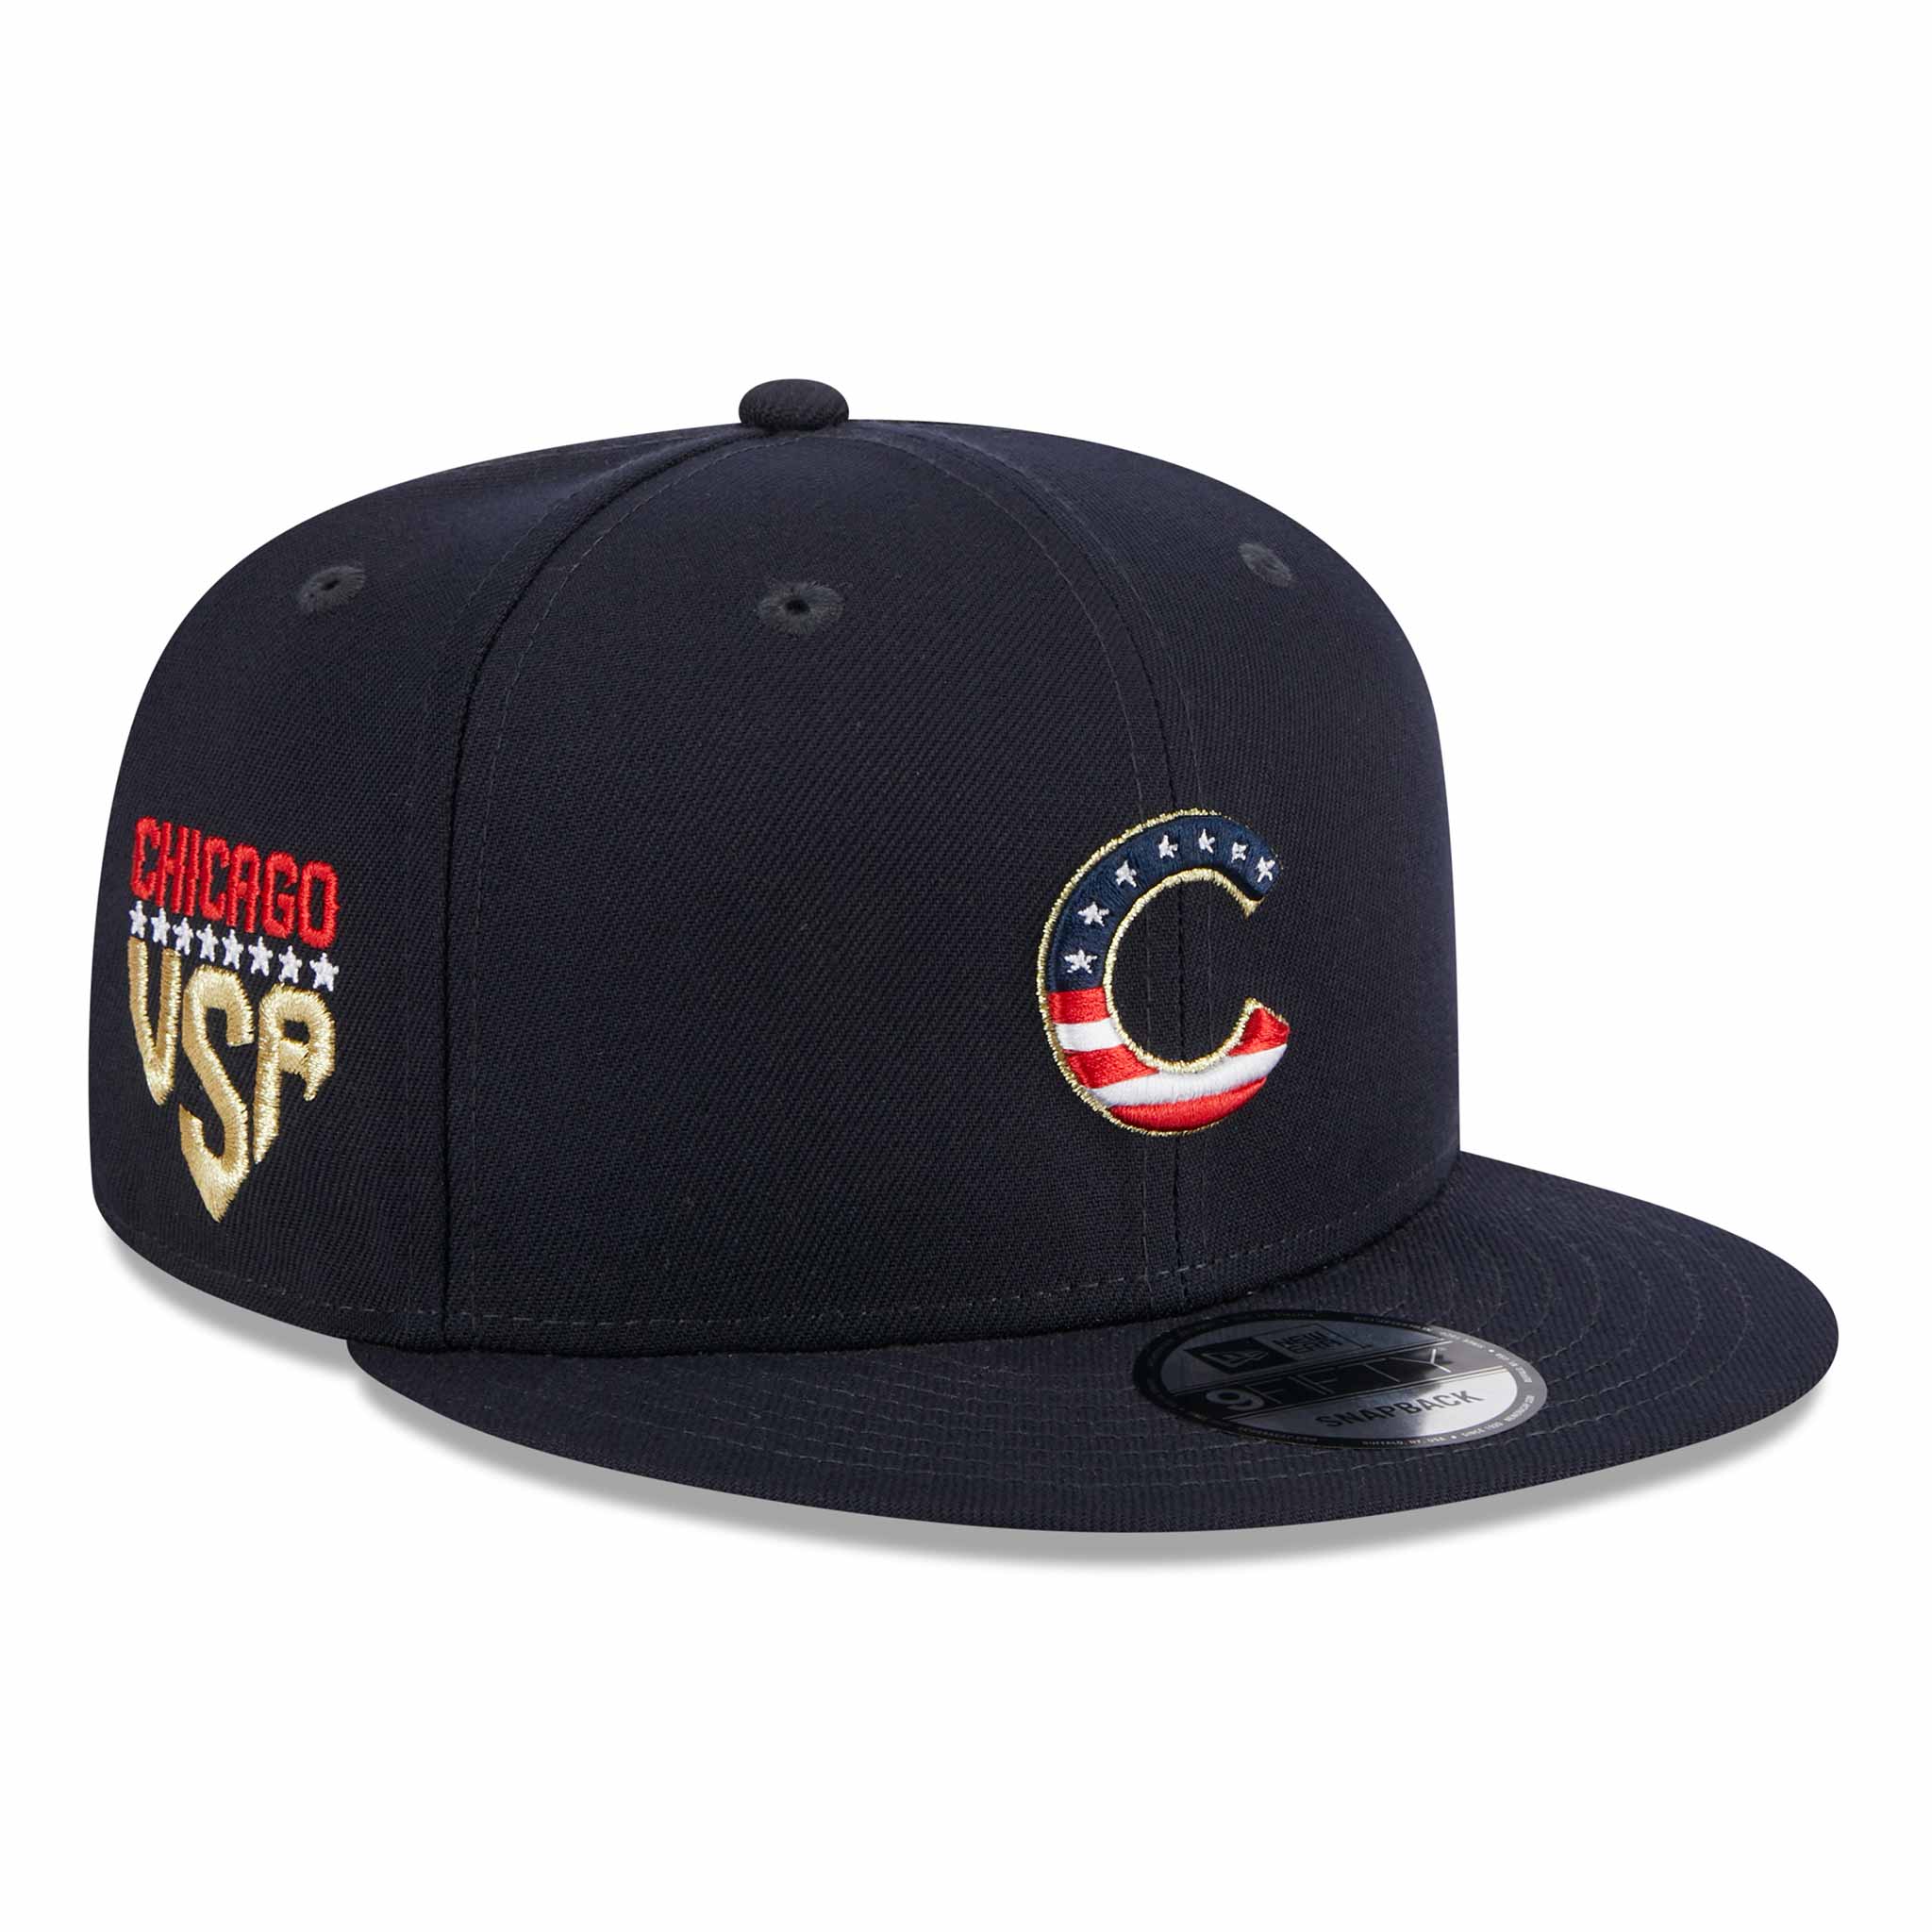 2023 Chicago Cubs City Connect New Era 9FIFTY MLB Snapback Hat Cap